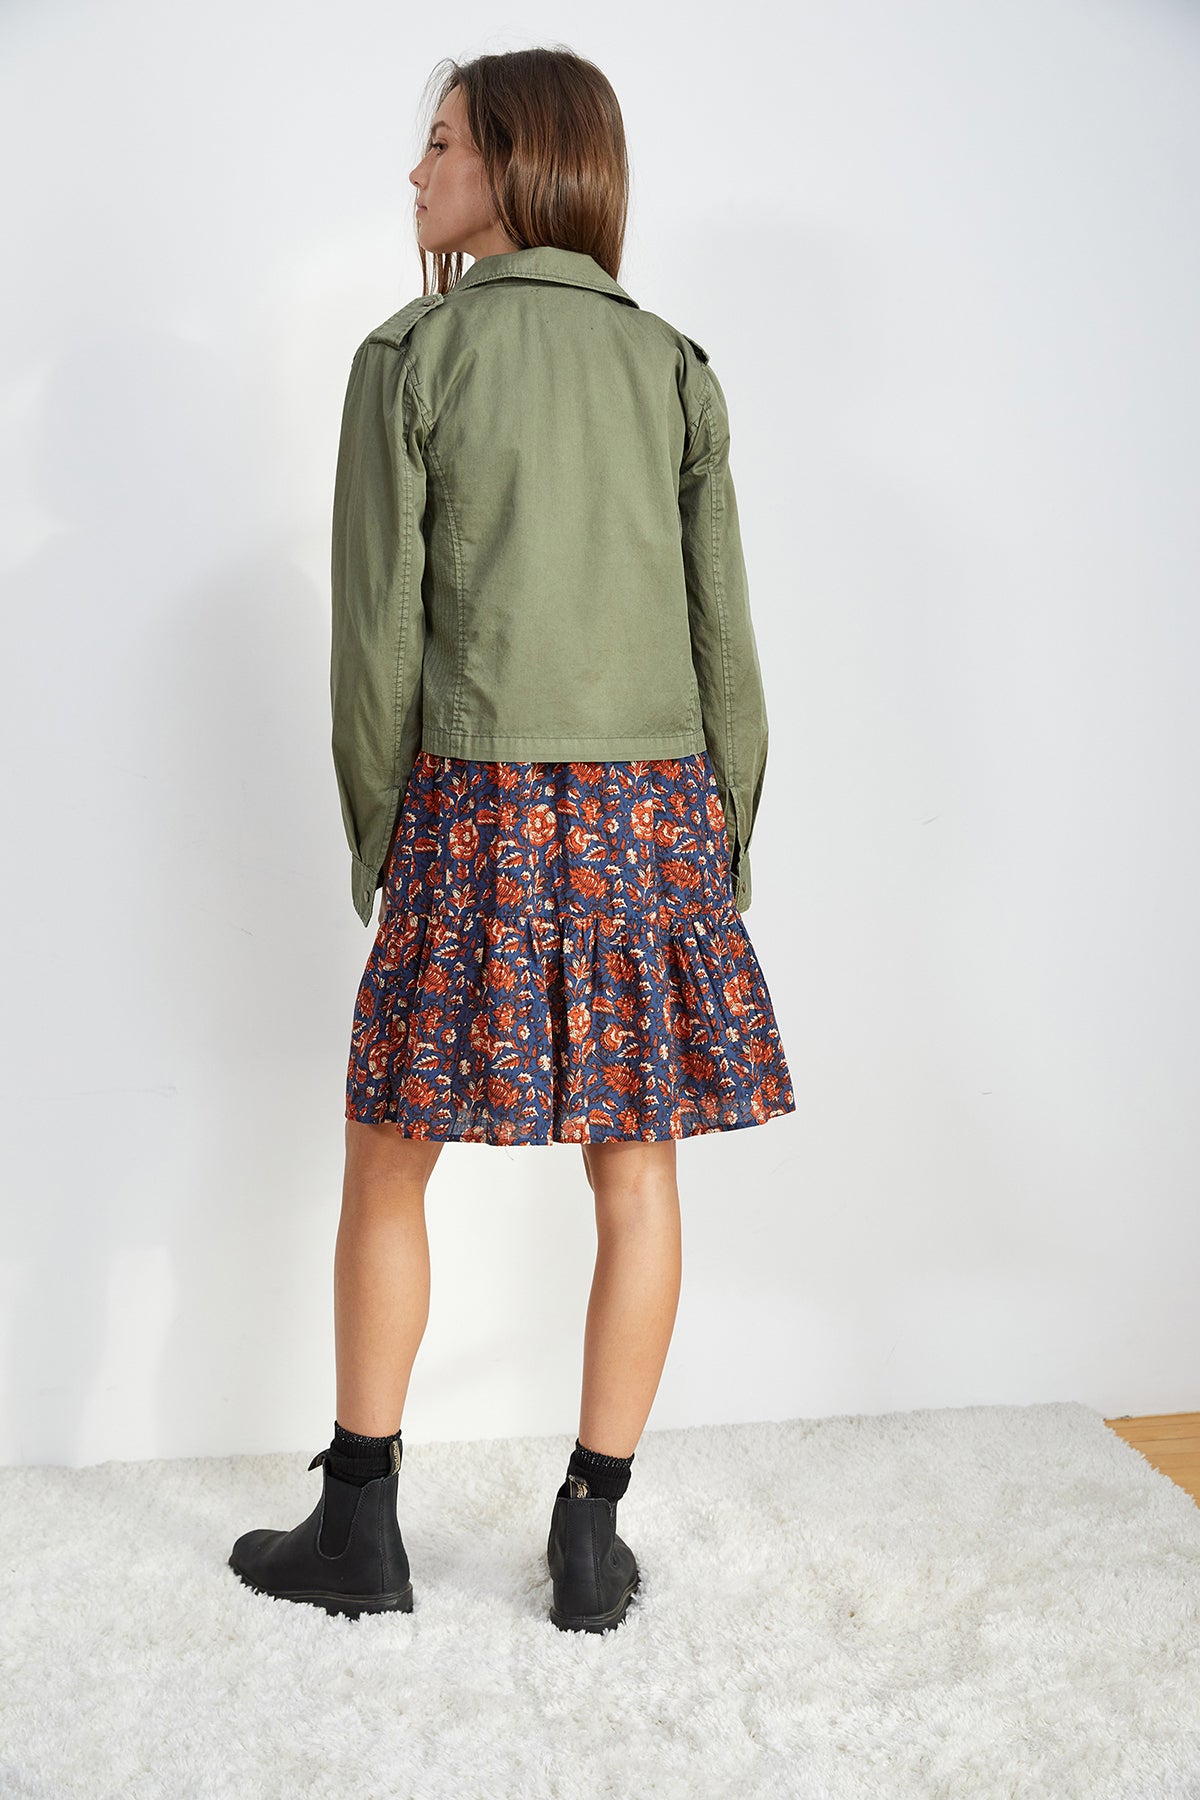   DIXIE CROPPED ARMY JACKET 